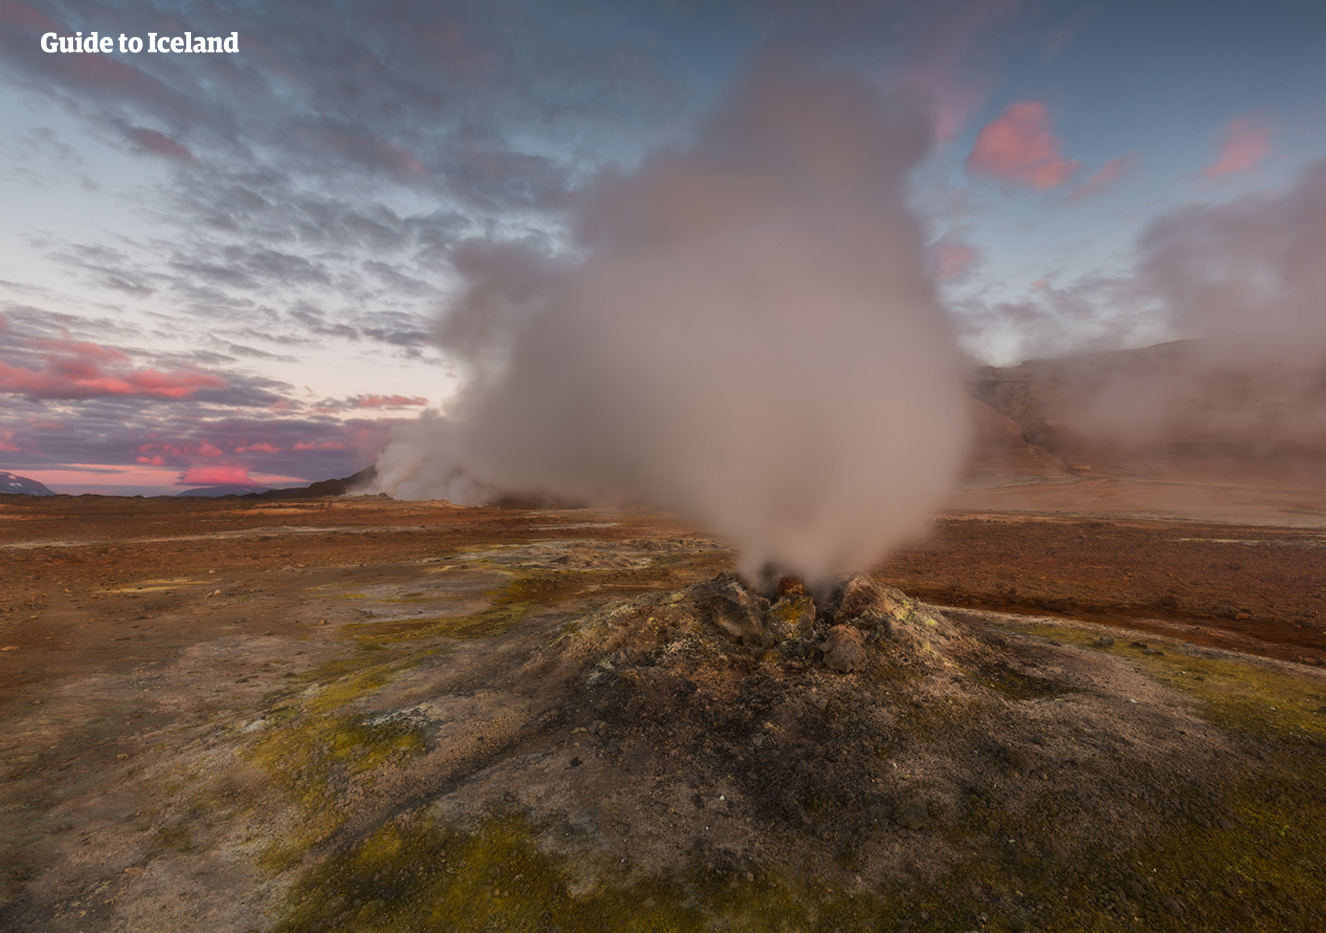 Steam rising from a fumarole vent in a geothermal area near Lake Mývatn in northern Iceland